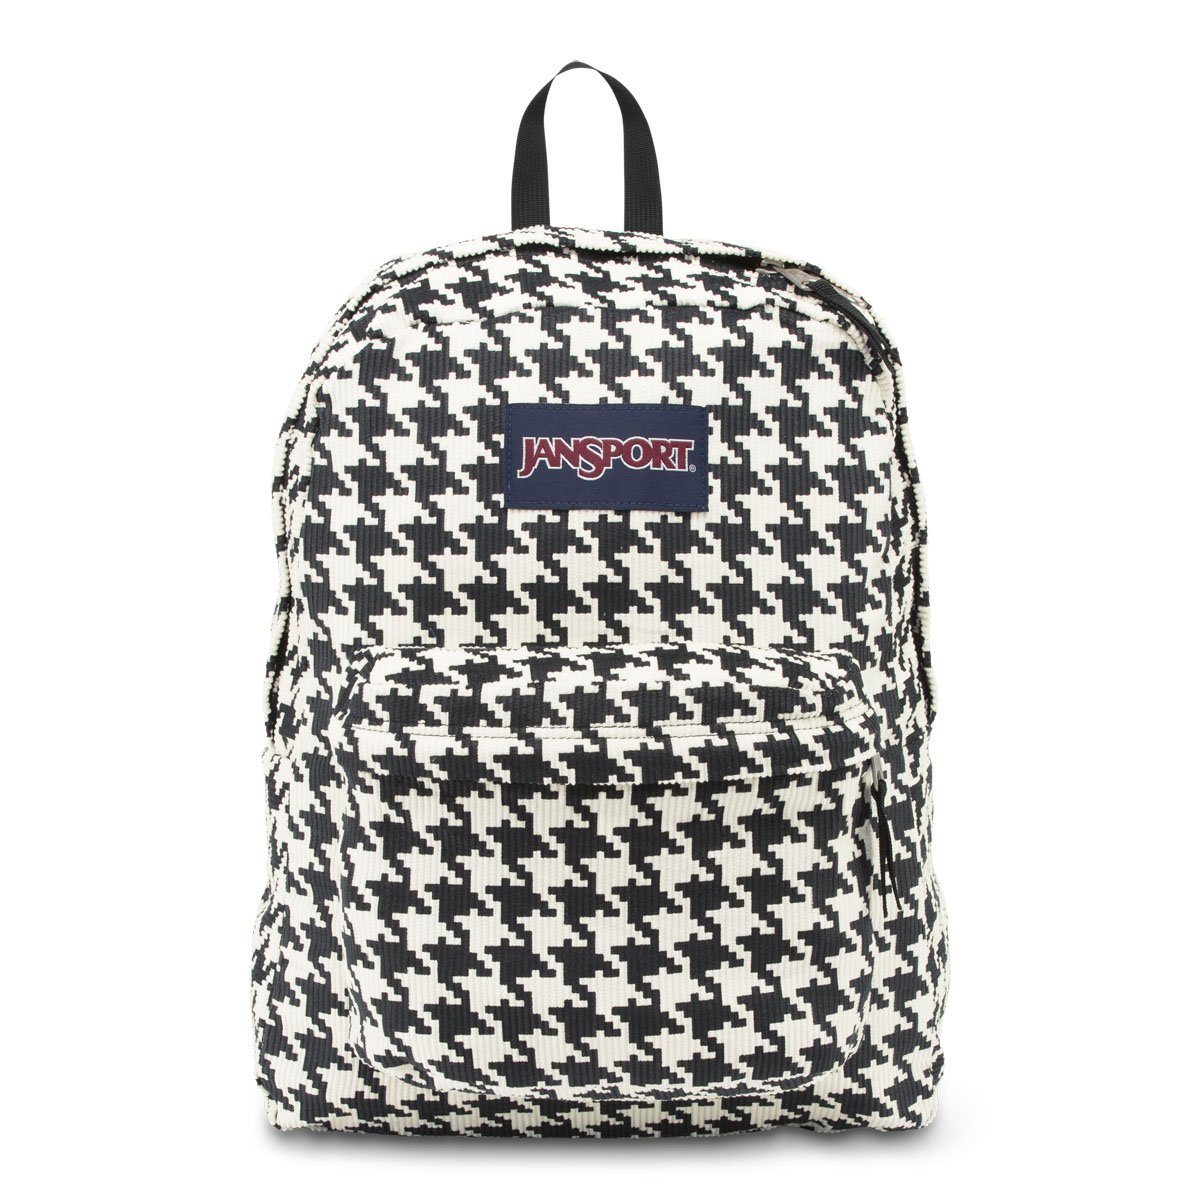 Backpack High Stake Wh/bk Houndstooth Corduroy